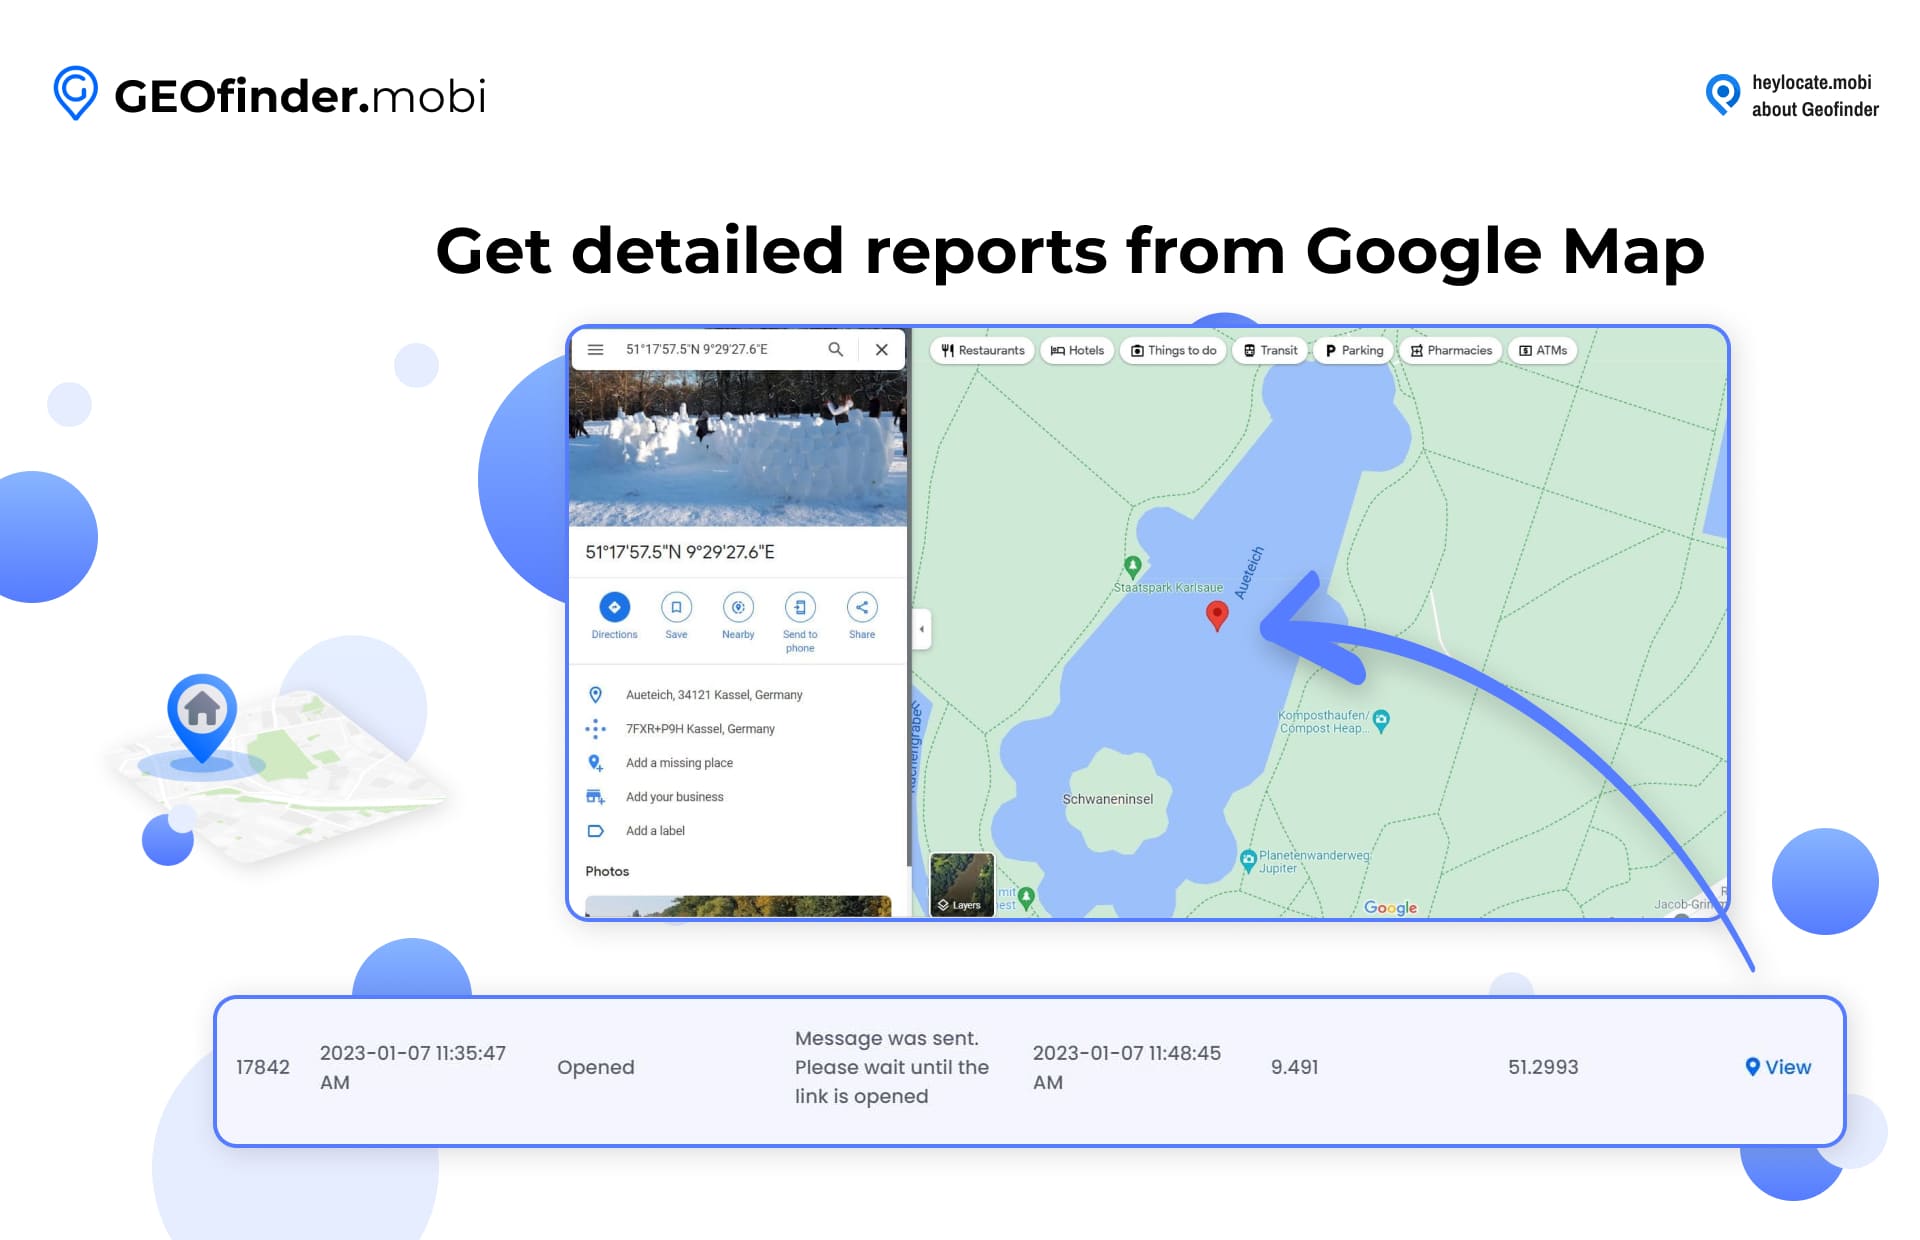 Display of GEOfinder.mobi's feature for obtaining detailed reports from Google Maps, showing a map and location coordinates, along with a detailed view of a map highlighting a specific area with a location marker.